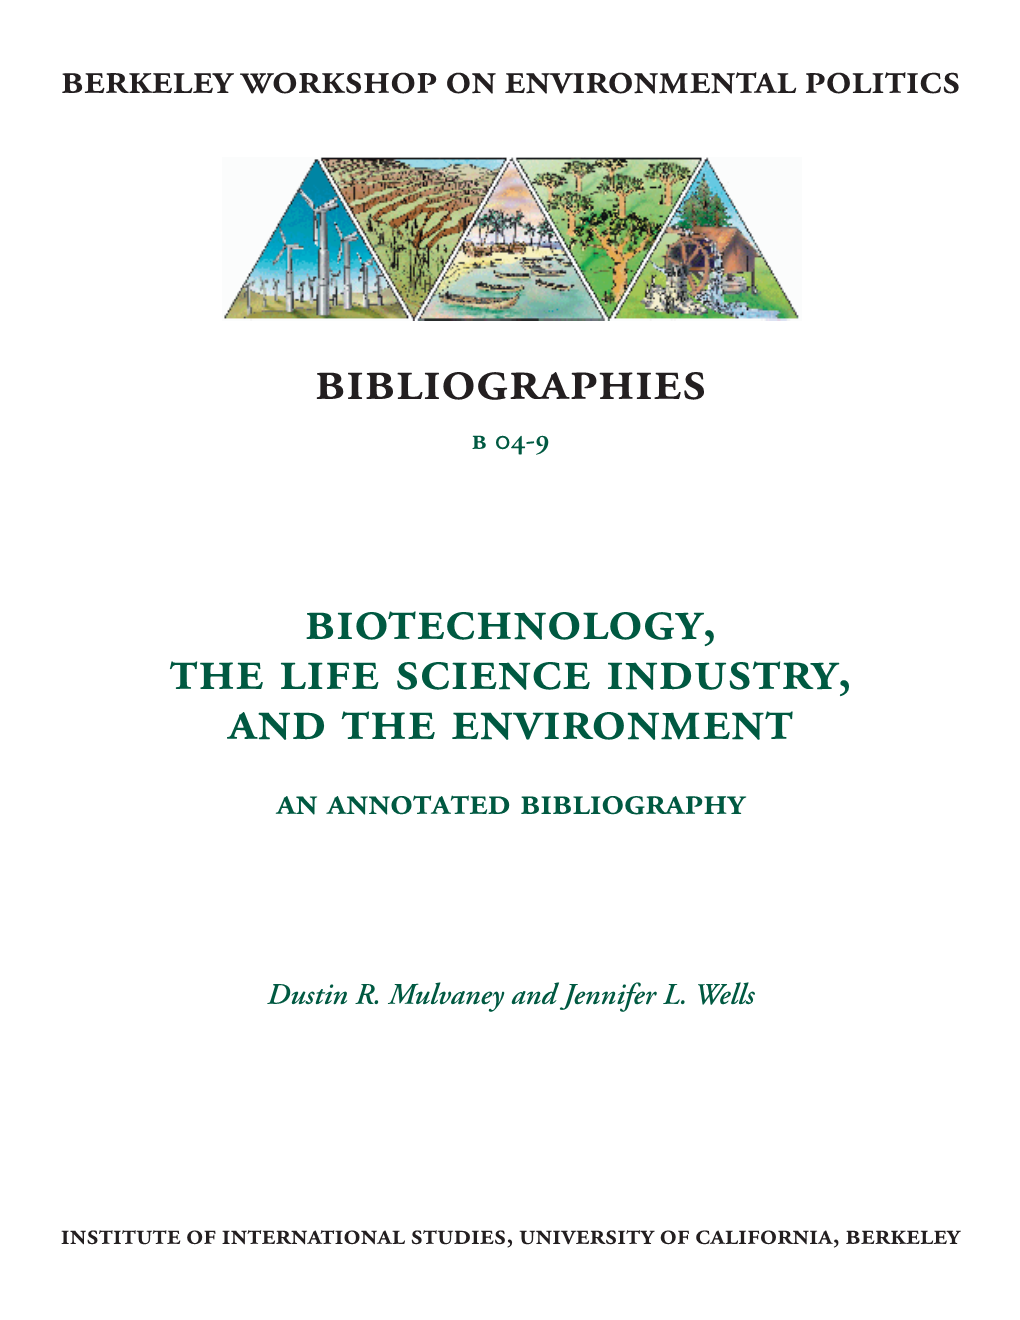 Bibliographies Biotechnology, the Life Science Industry, and the Environment